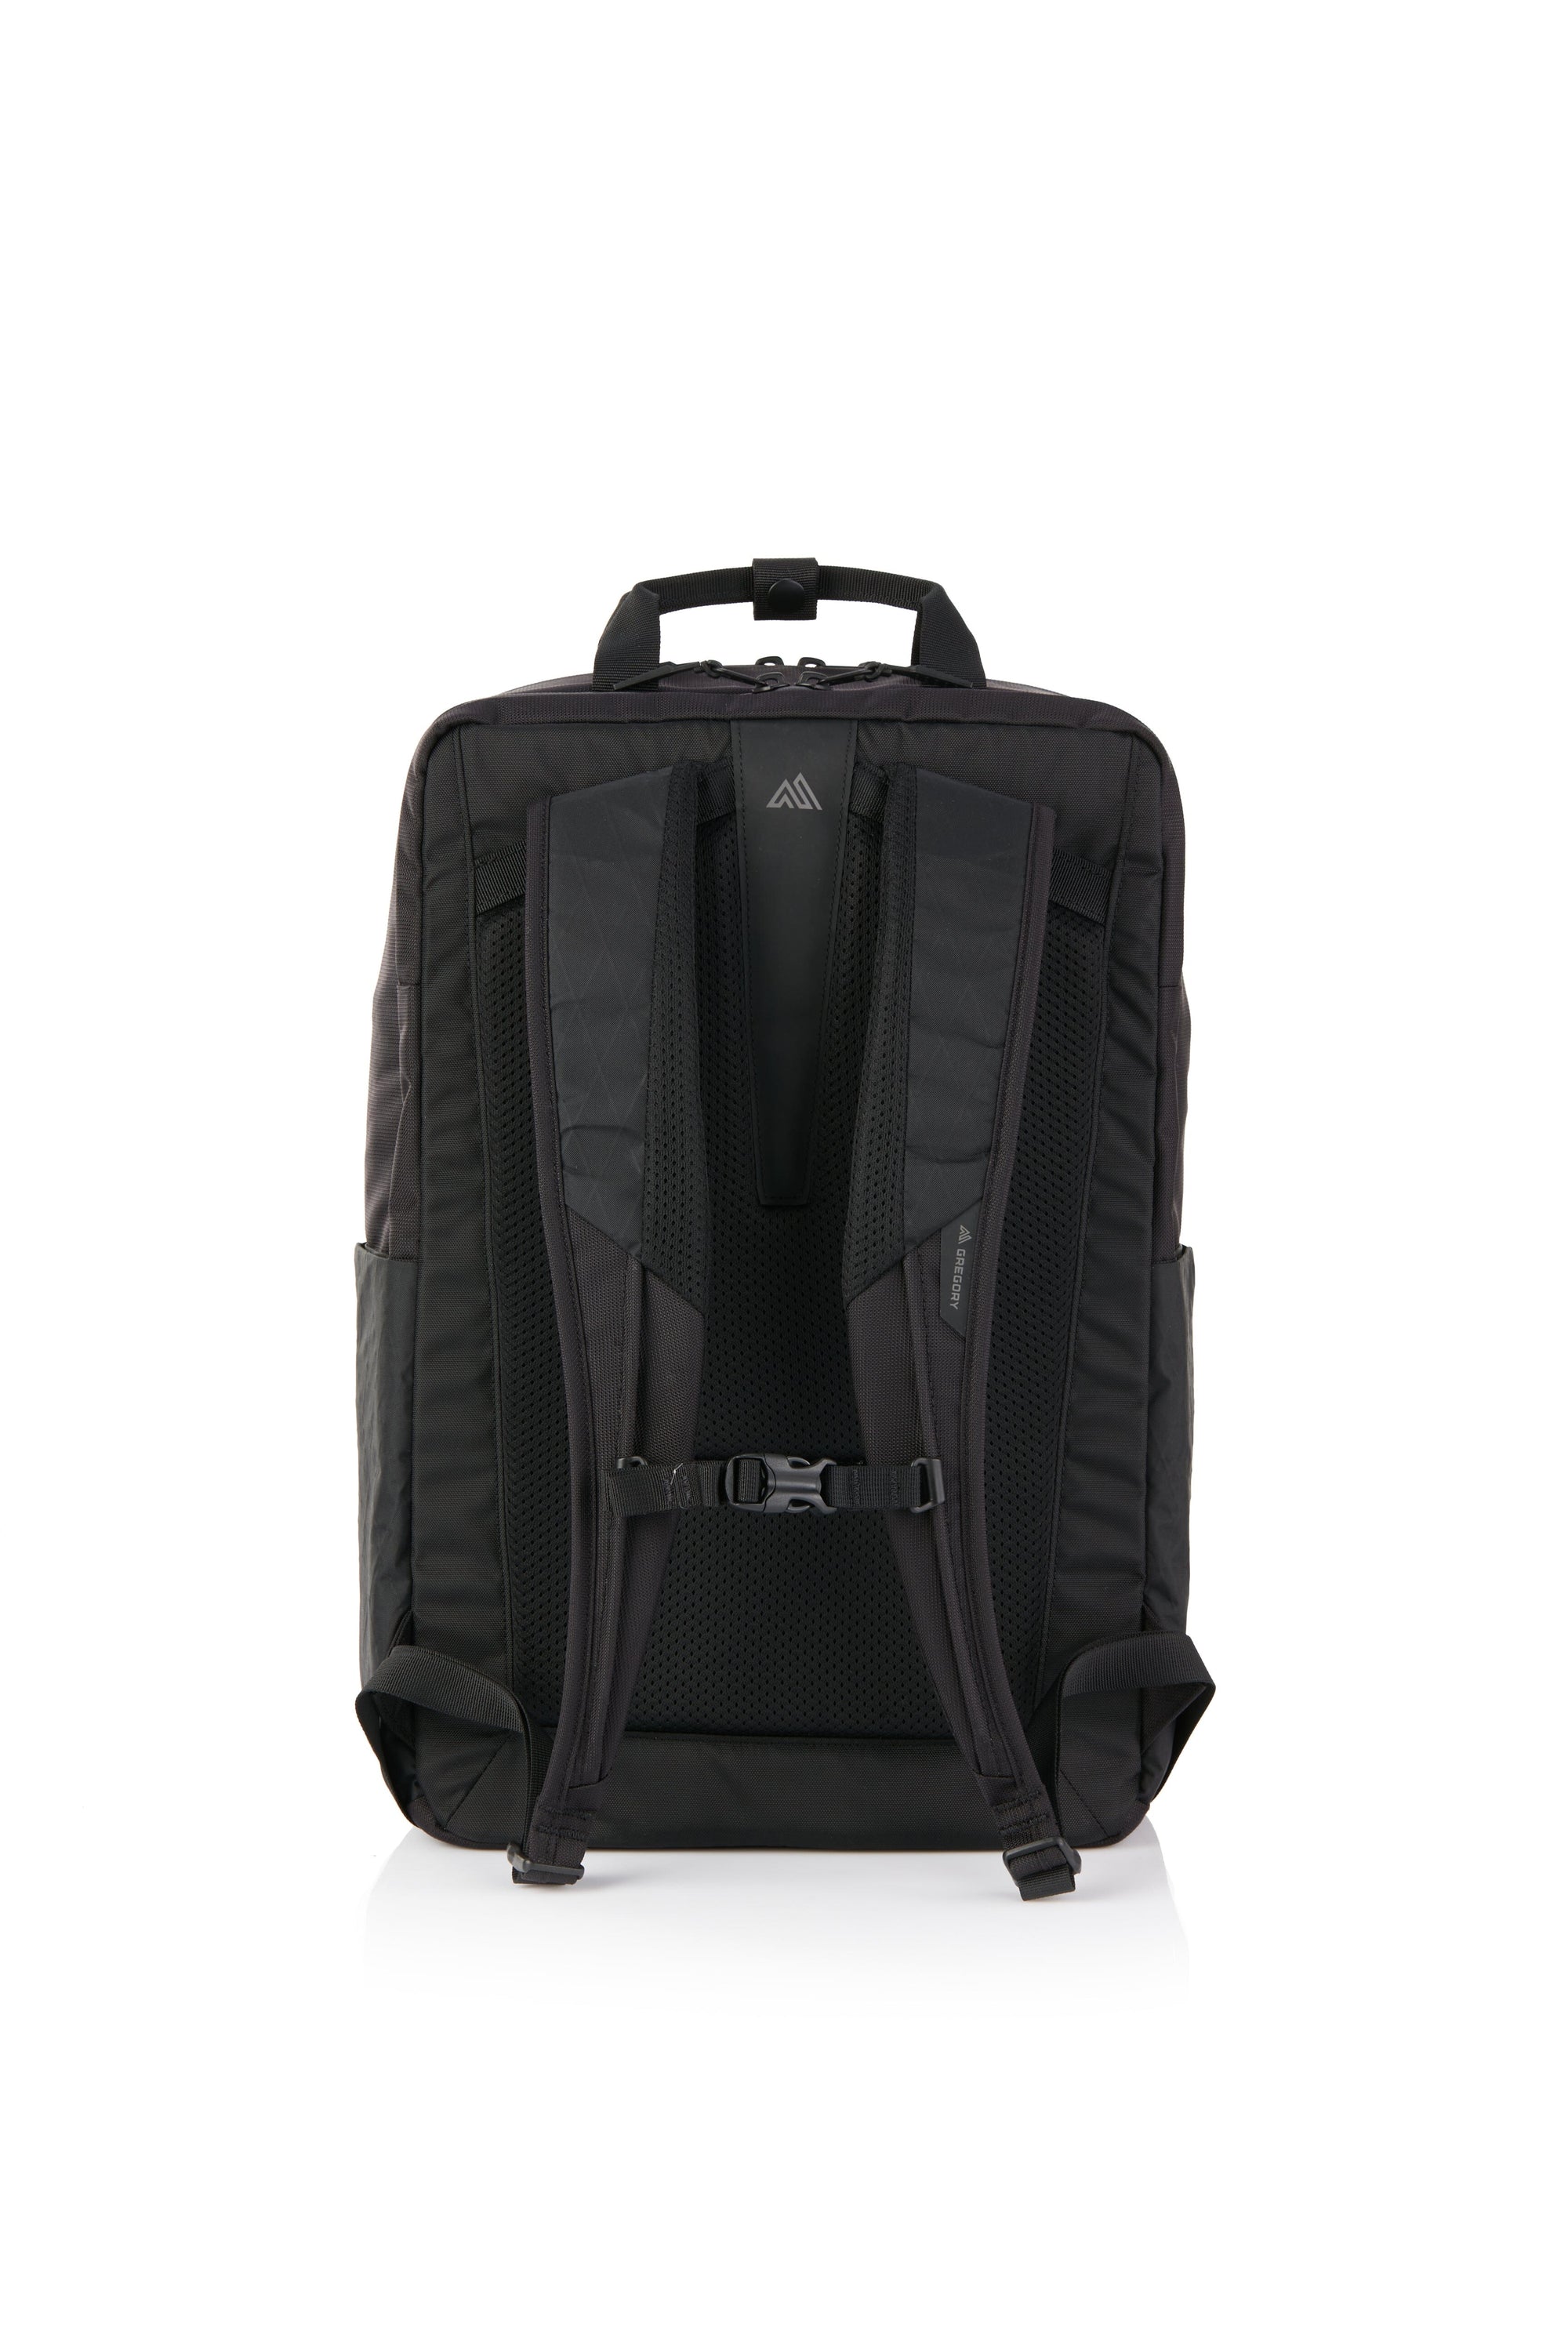 Gregory Commute Day Backpack XP Black 